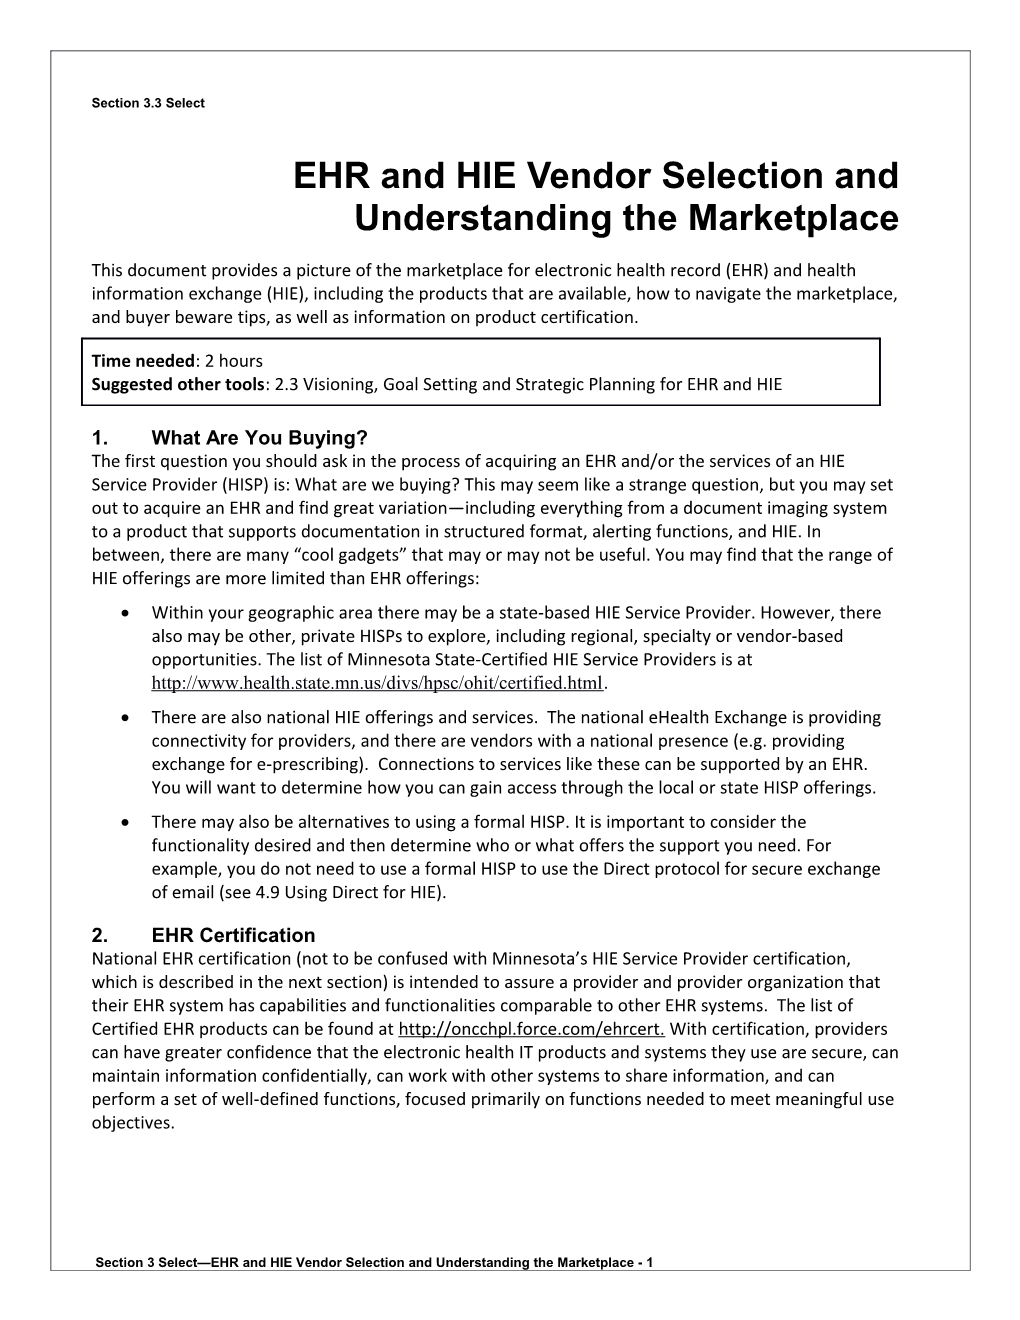 3 EHR and HIE Vendor Selection and Understanding the Marketplace